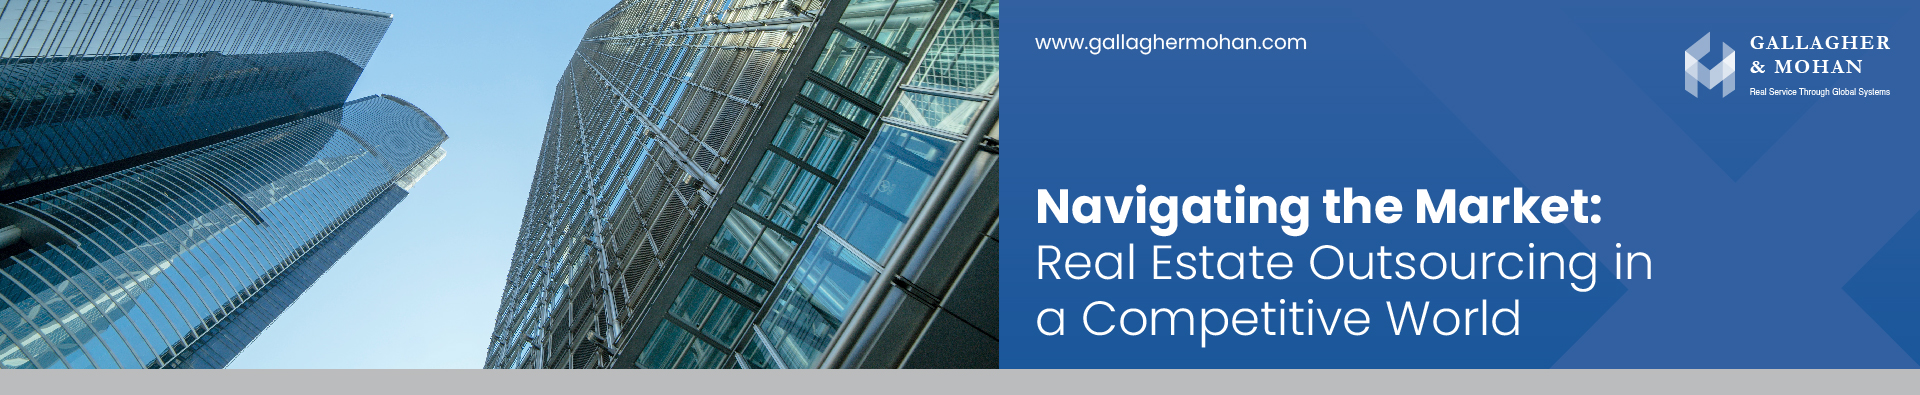 Navigating The Market Real Estate Outsourcing In A Competitive World